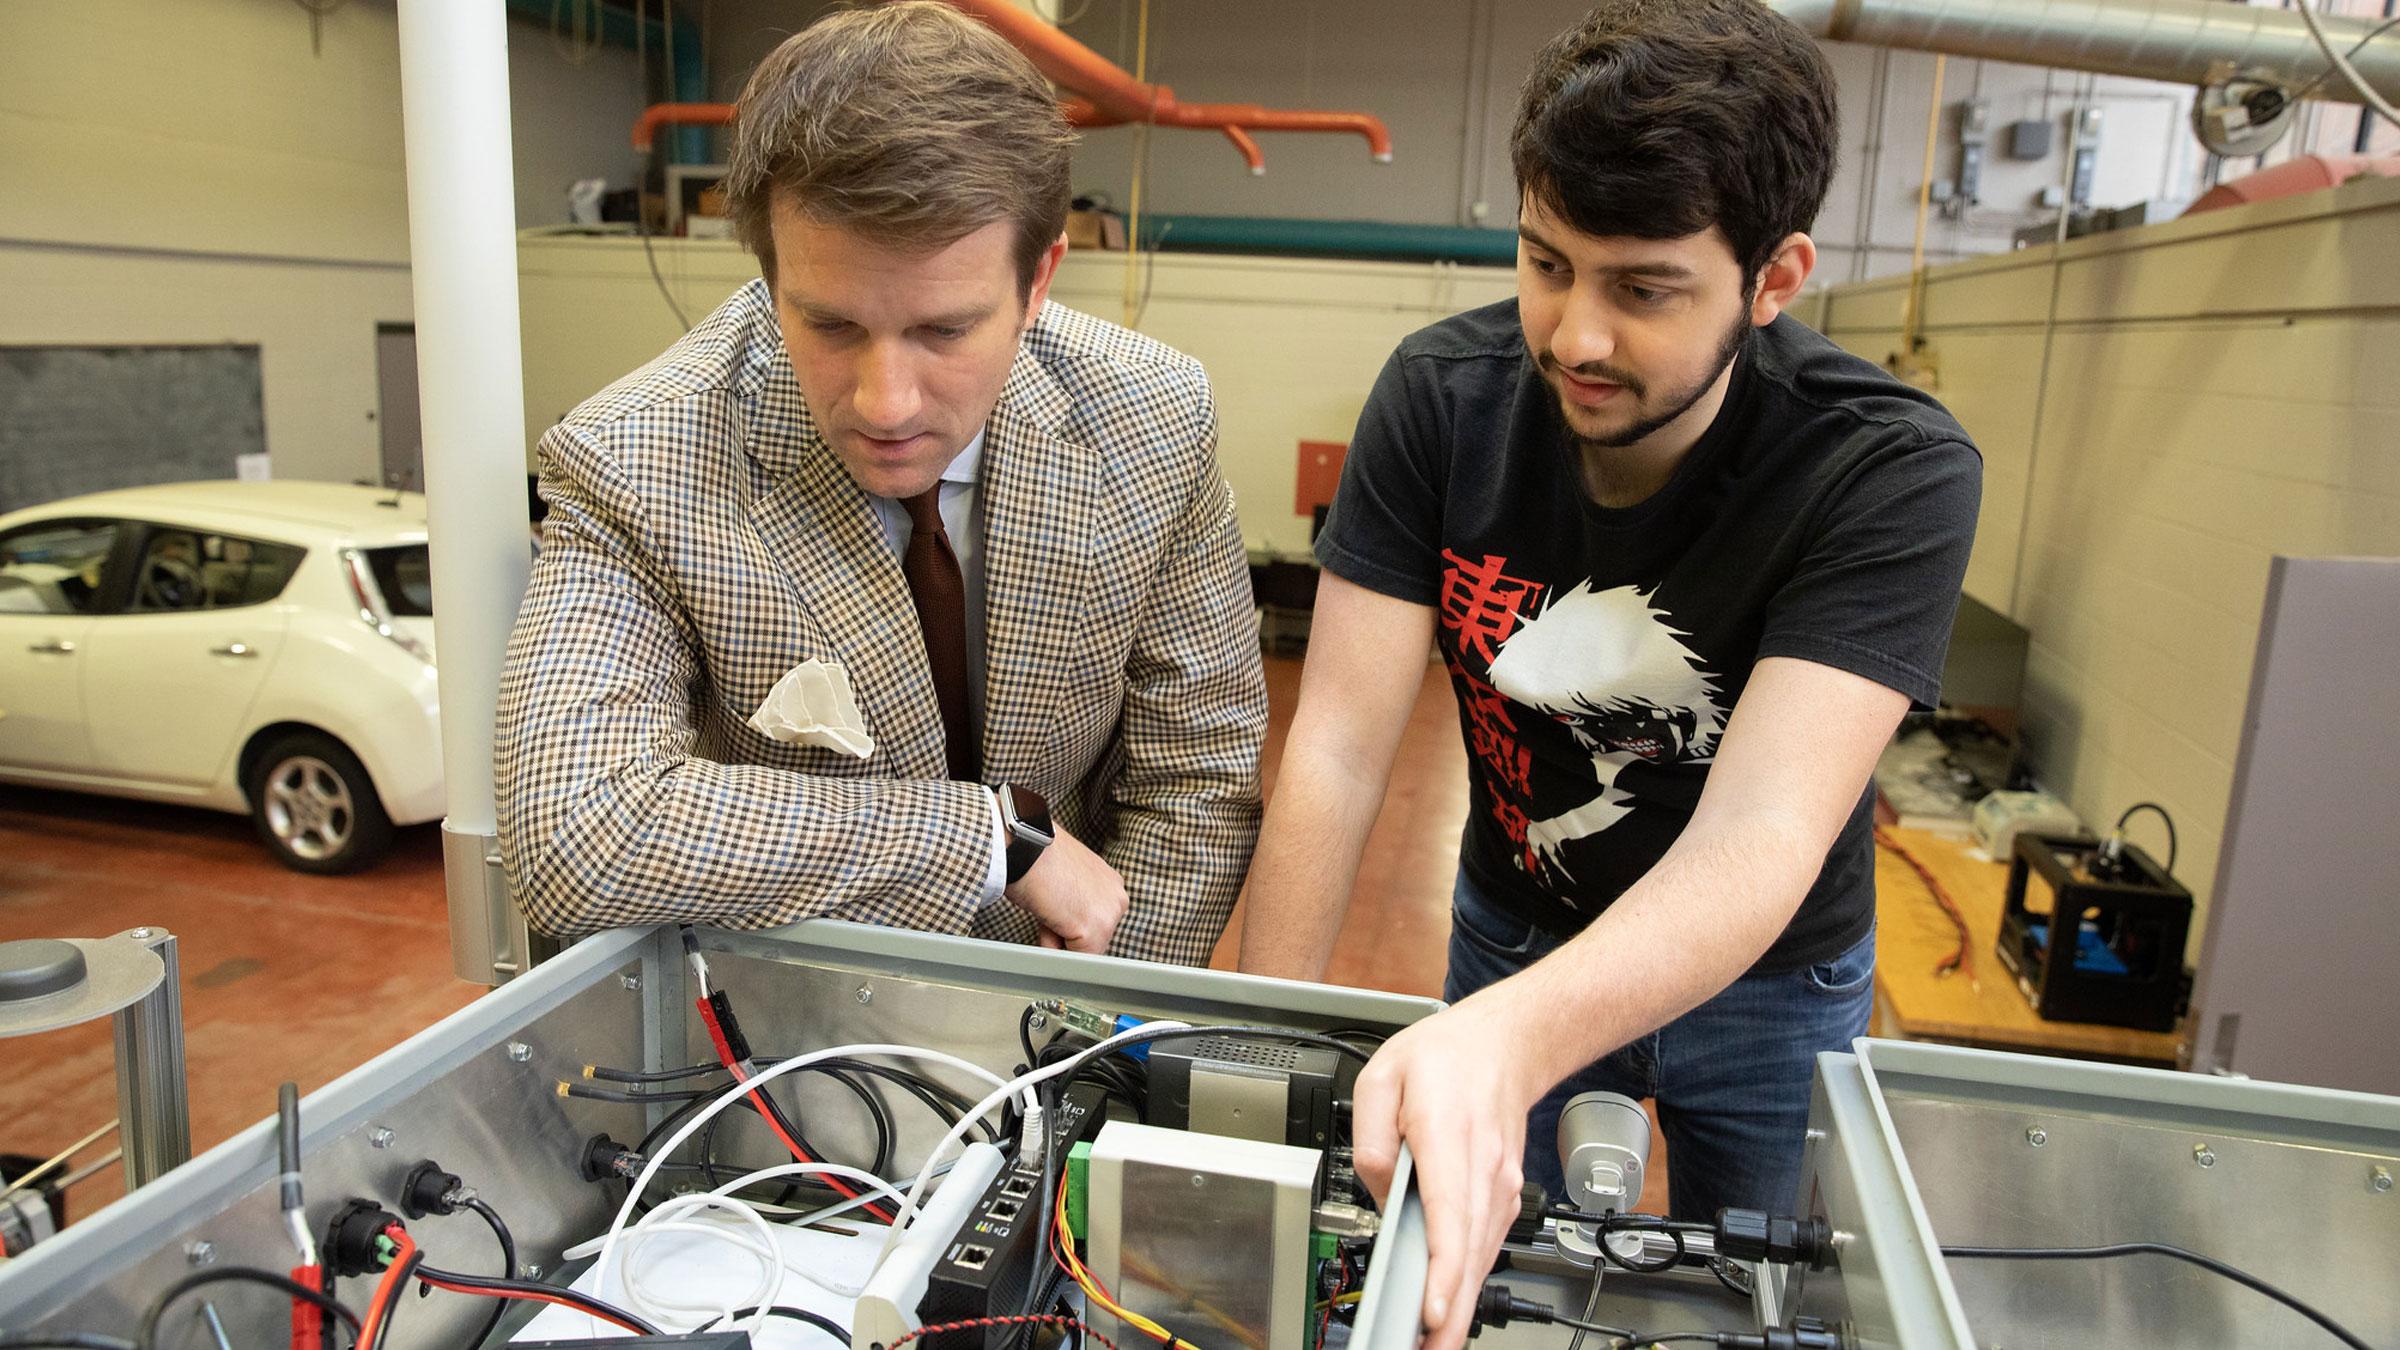 A University of Louisiana at Lafayette student and professor look at a control board while doing engineering research